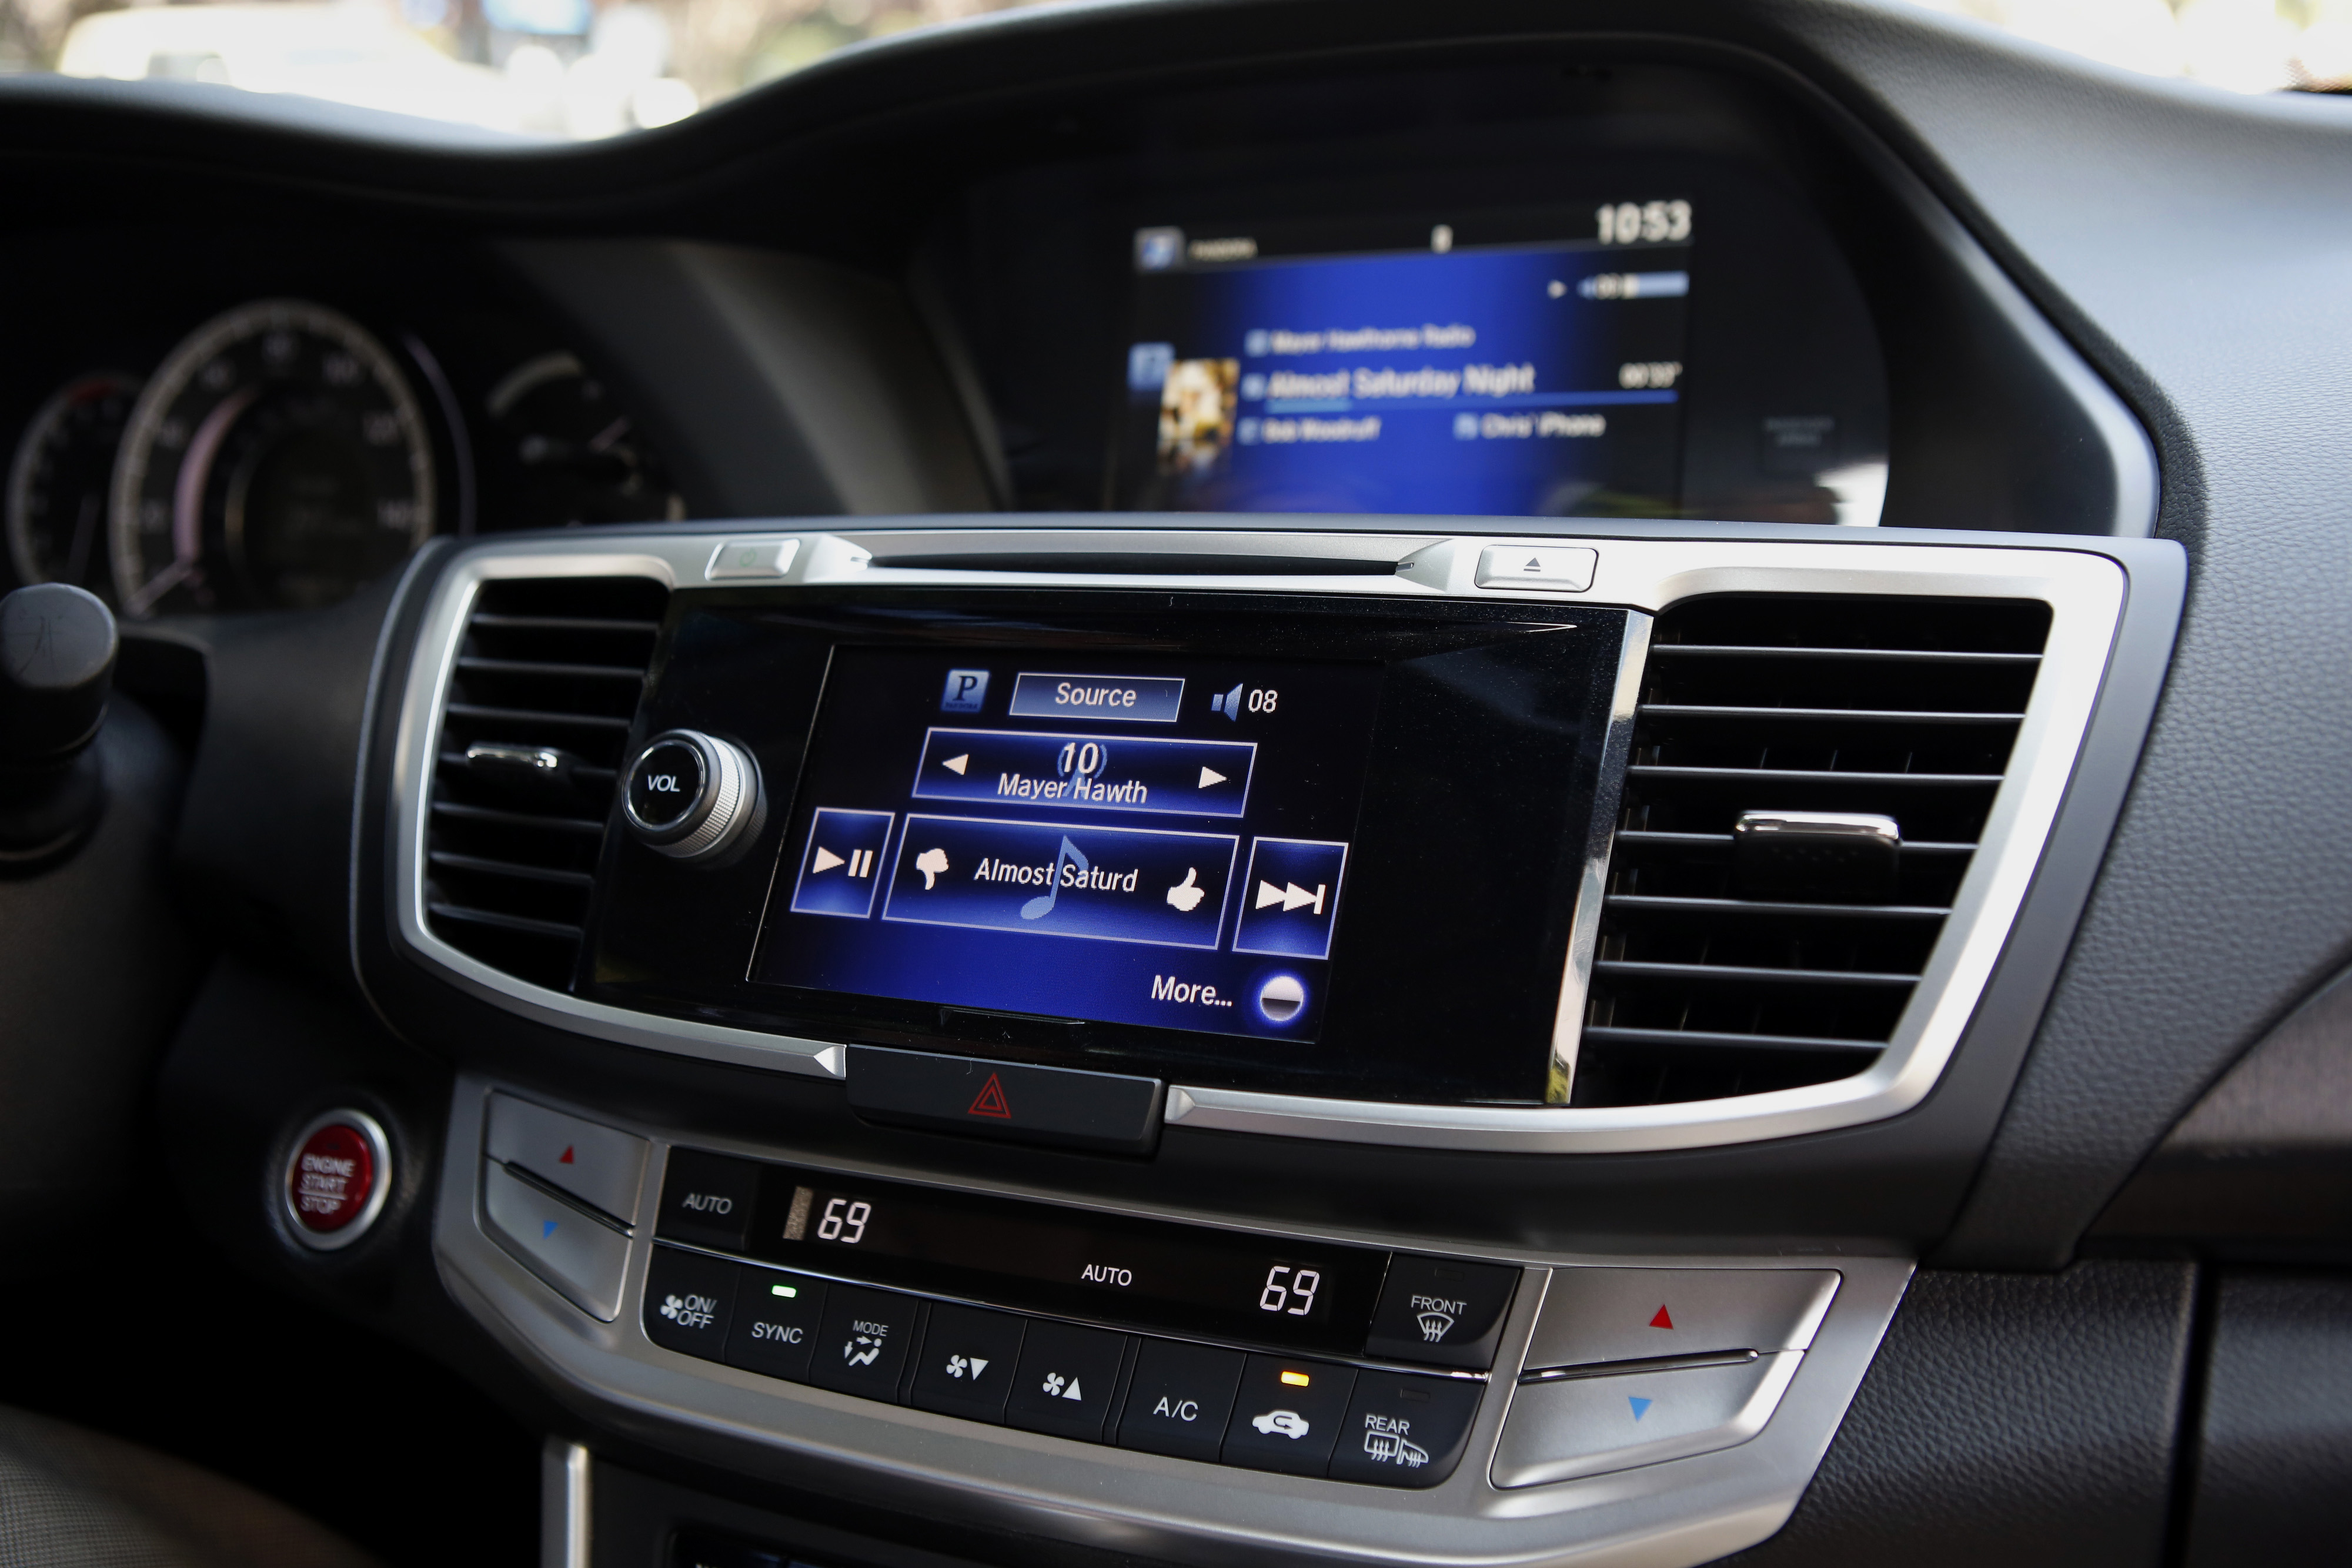 The Pandora integrated entertainment system is demonstrated inside a Honda Accord. (Bloomberg / Getty Images)